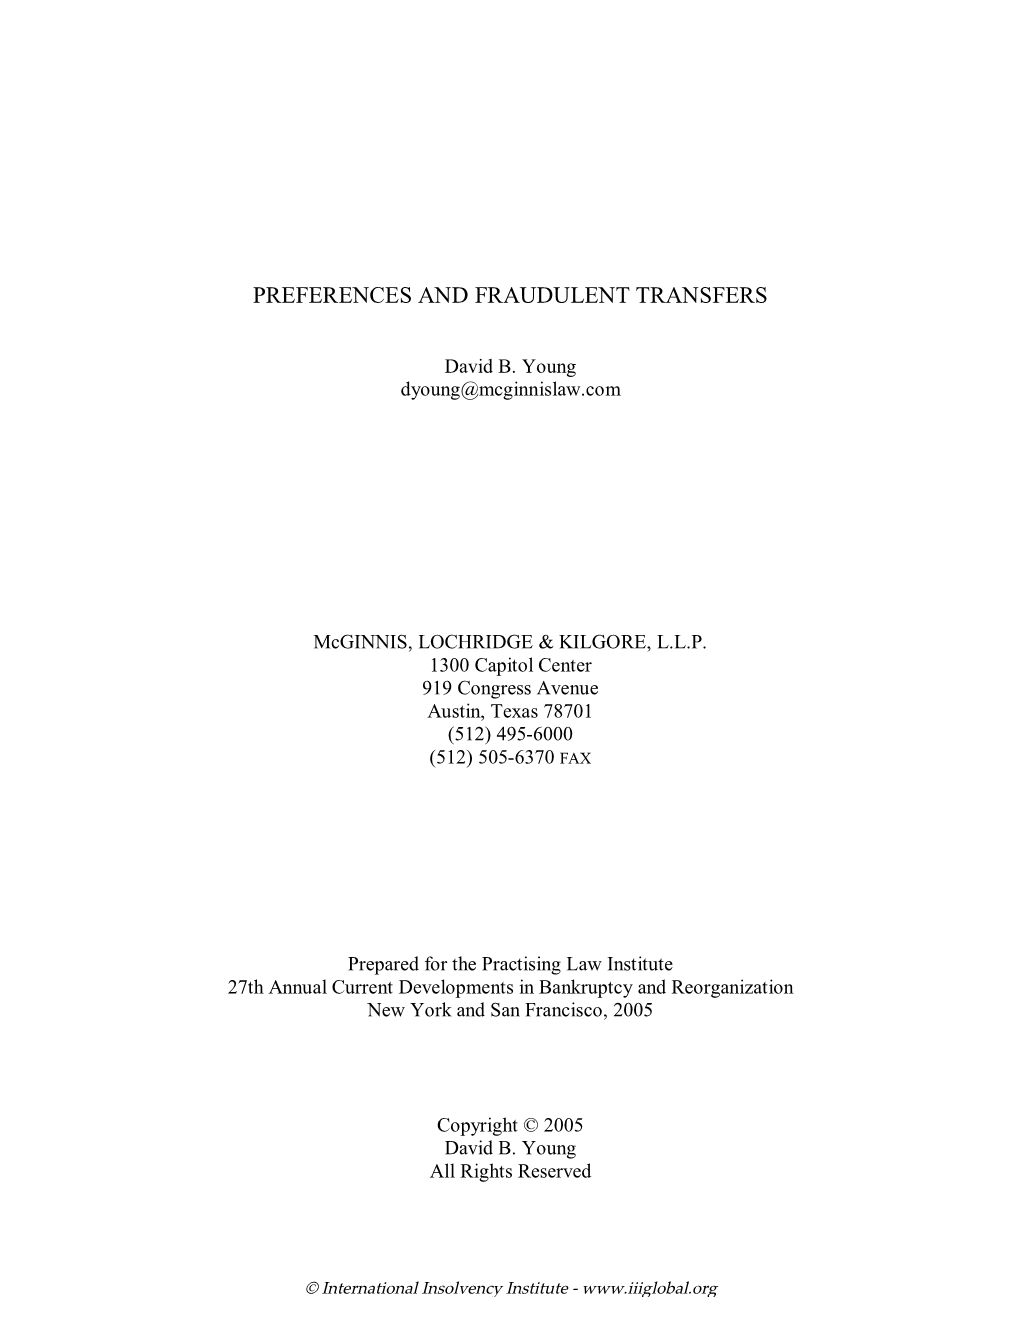 Preferences and Fraudulent Transfers